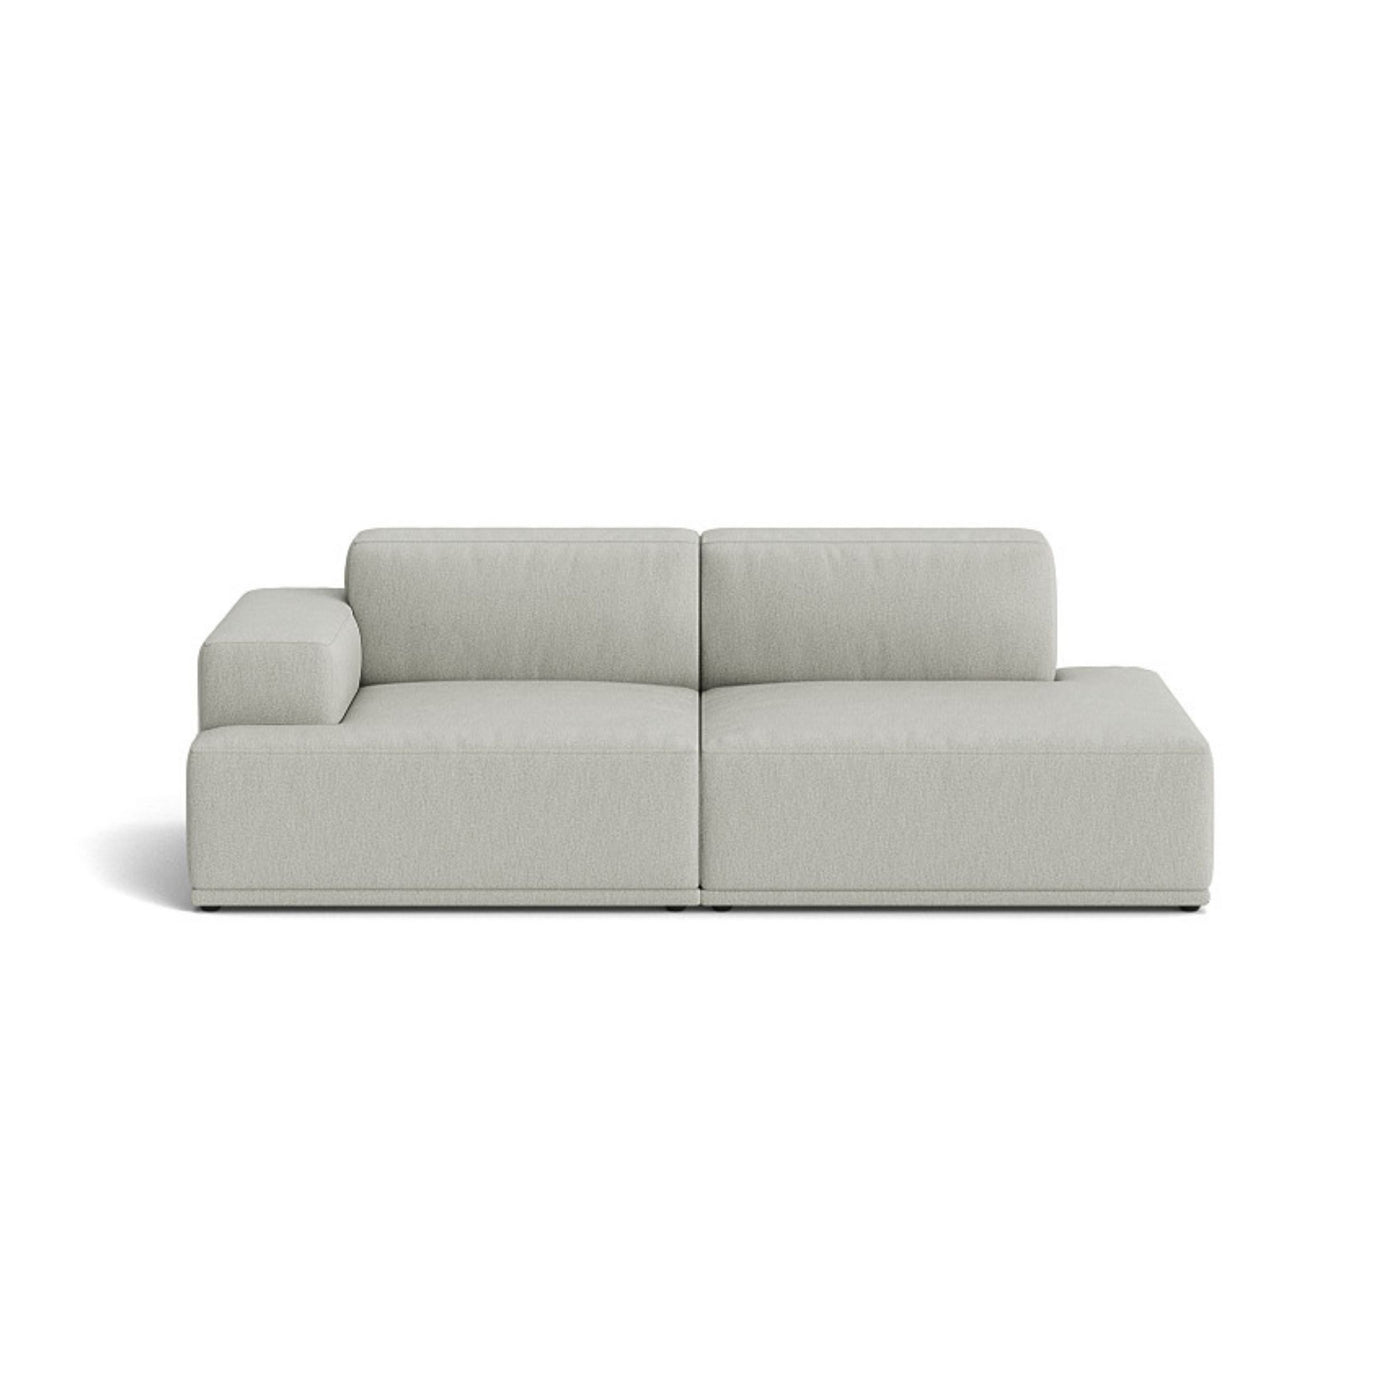 Muuto Connect Soft Modular 2 Seater Sofa, configuration 2. made-to-order from someday designs. #colour_clay-12